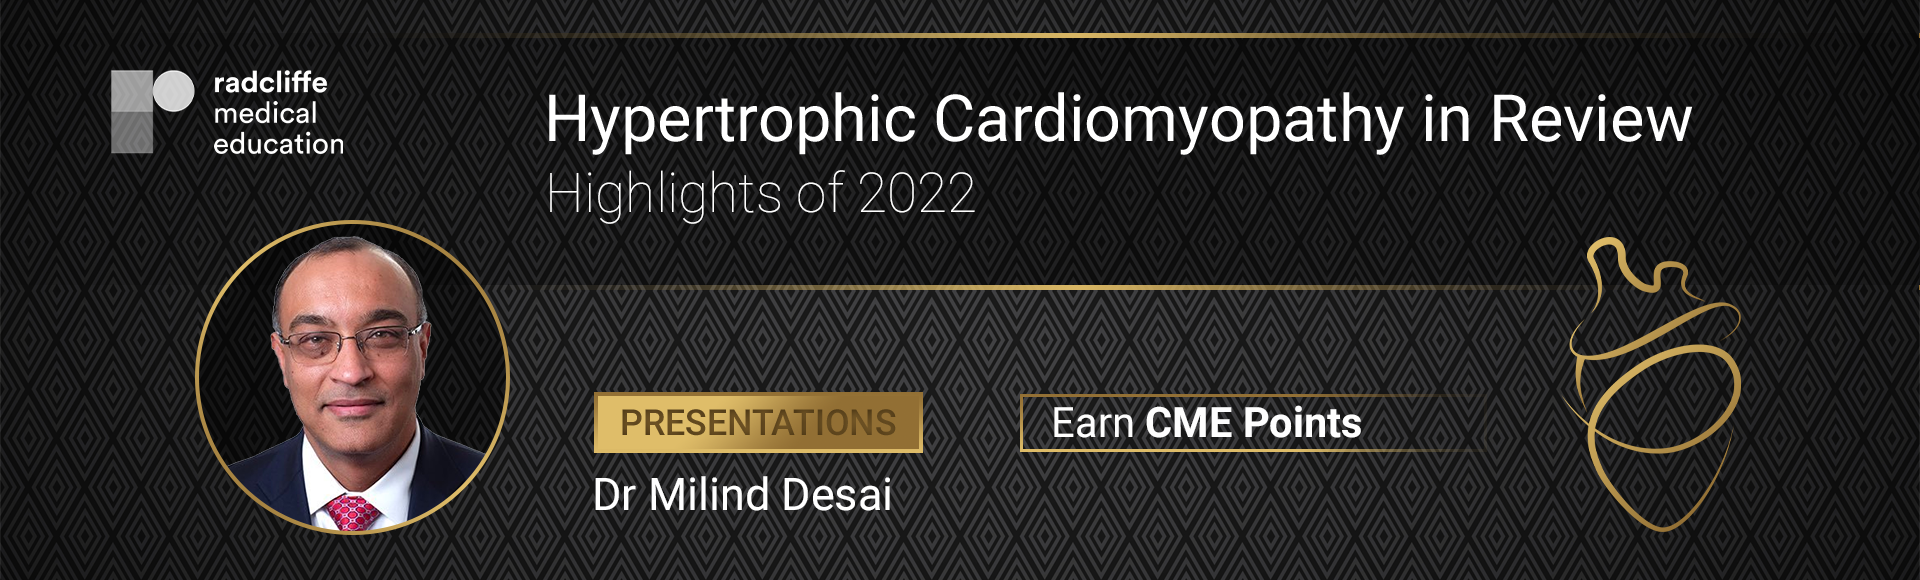 HCM in Review: Highlights of 2022